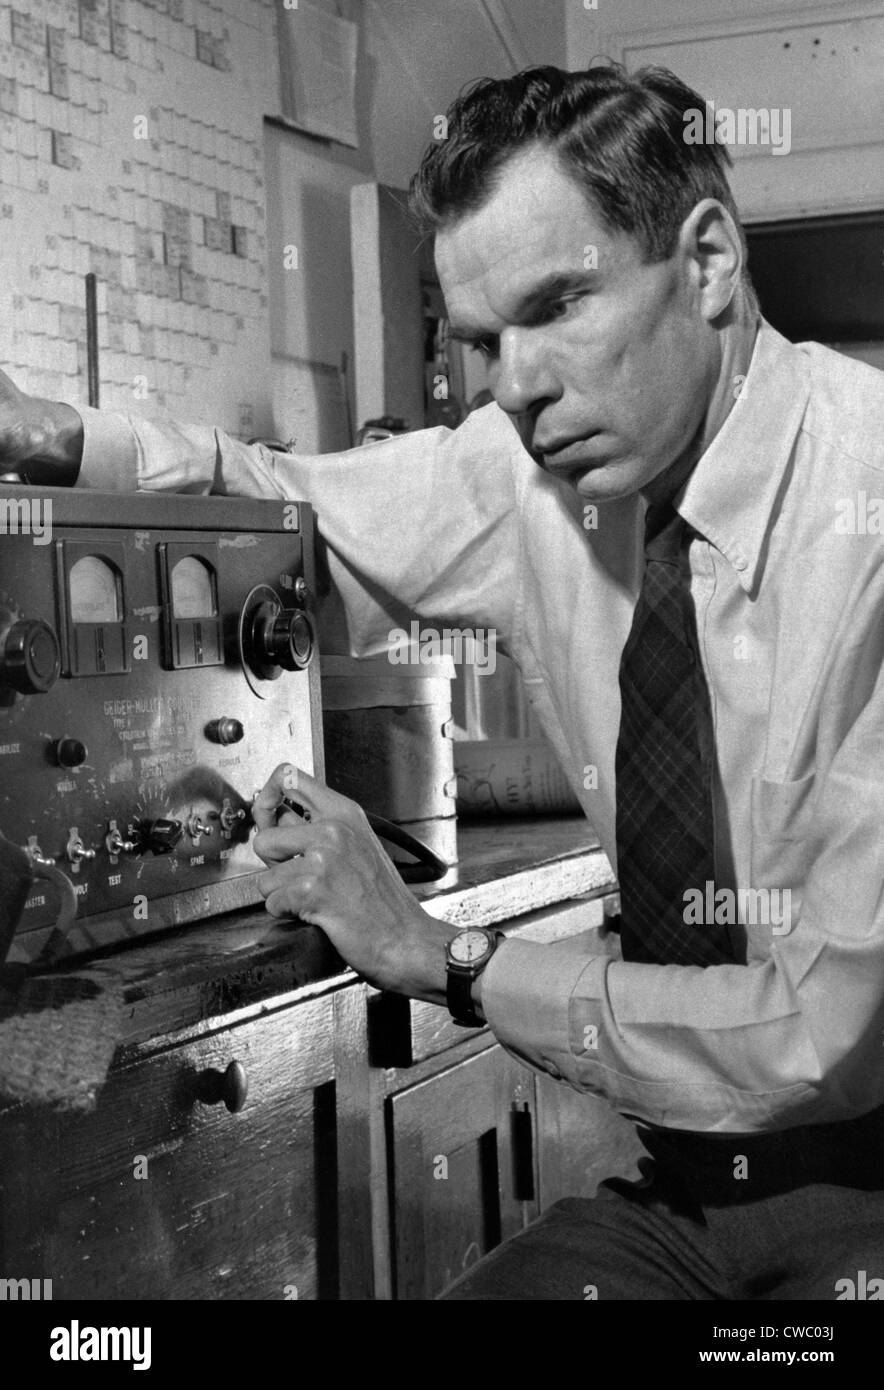 Glenn seaborg hi-res stock photography and images - Alamy